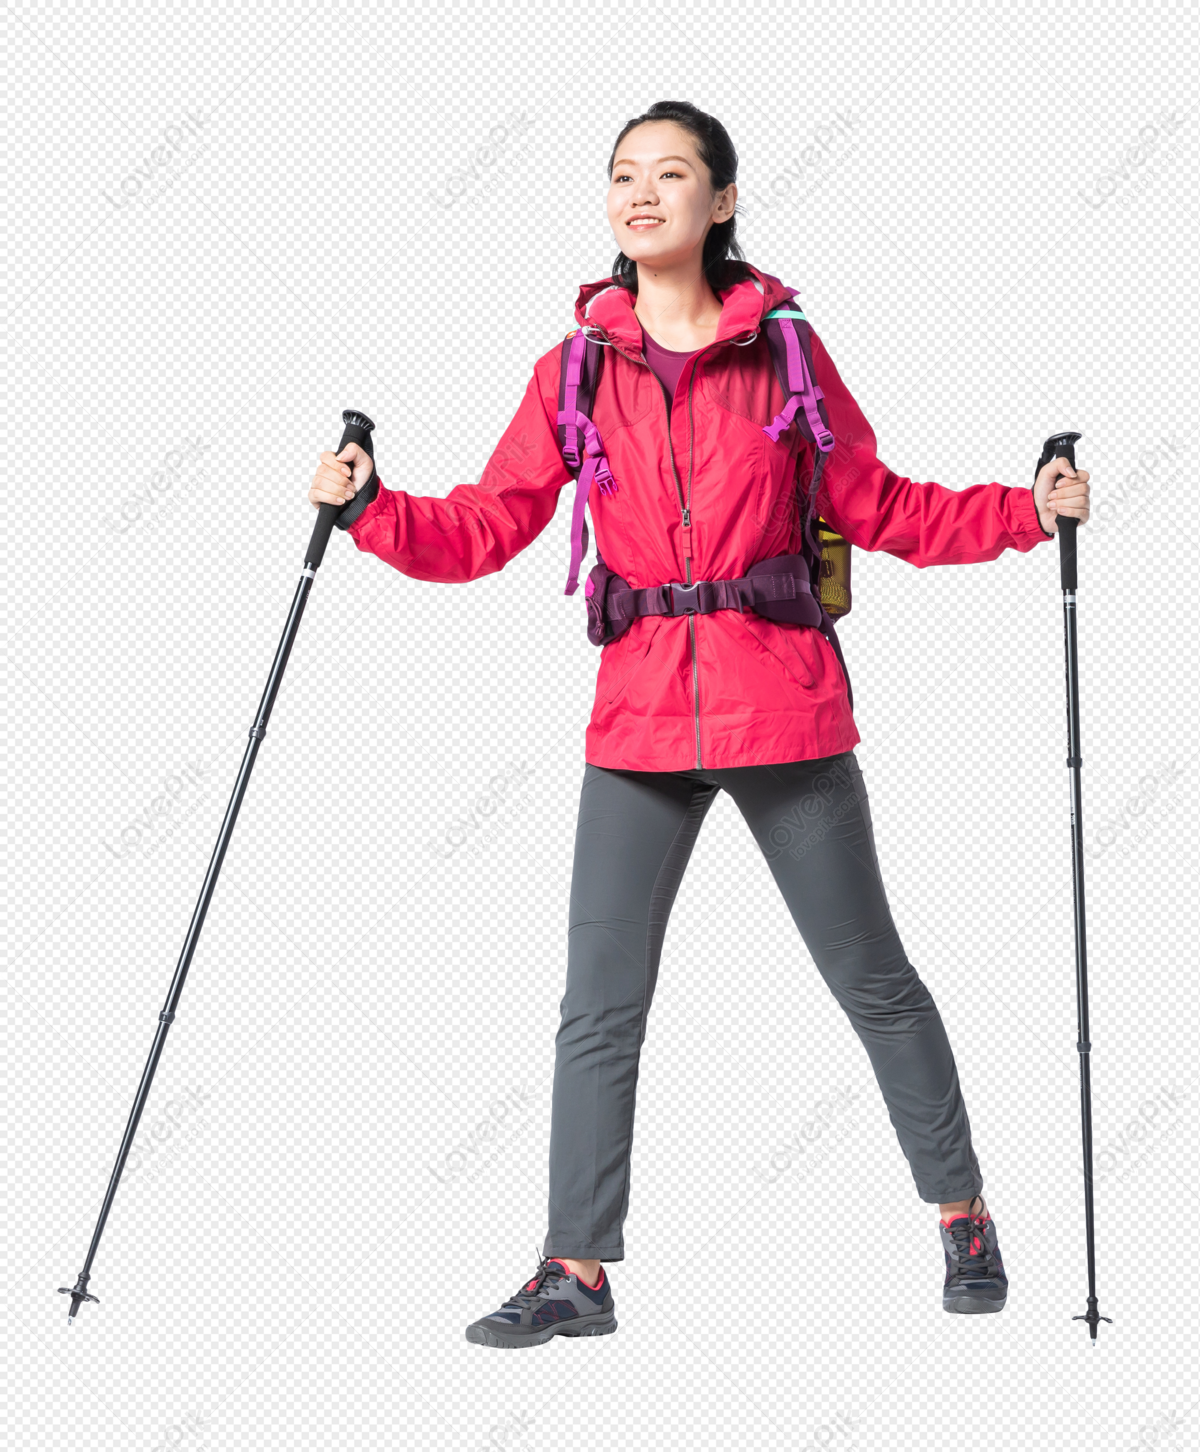 Hiking Young Women, Pink Woman, Hiking Outdoors, Pink Red PNG Image And ...